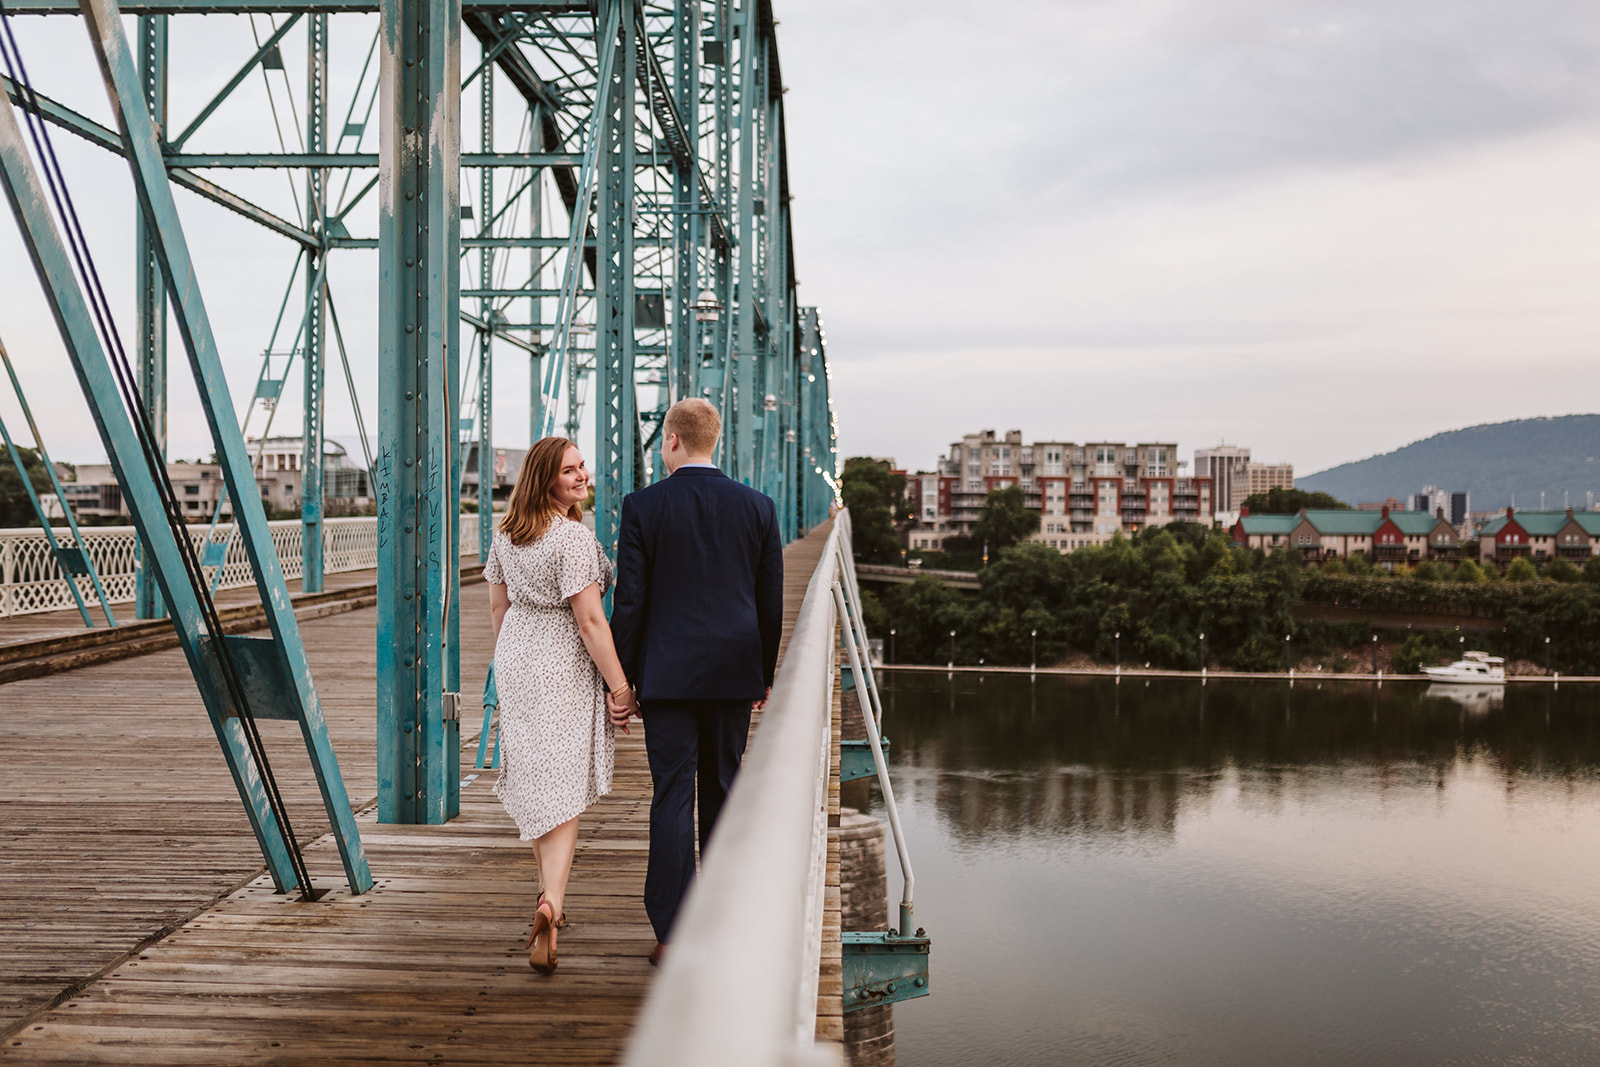 A couple crosses the Walking Bridge in Chattanooga, TN, hand-in-hand. The woman looks back over her should and smiles at the camera.